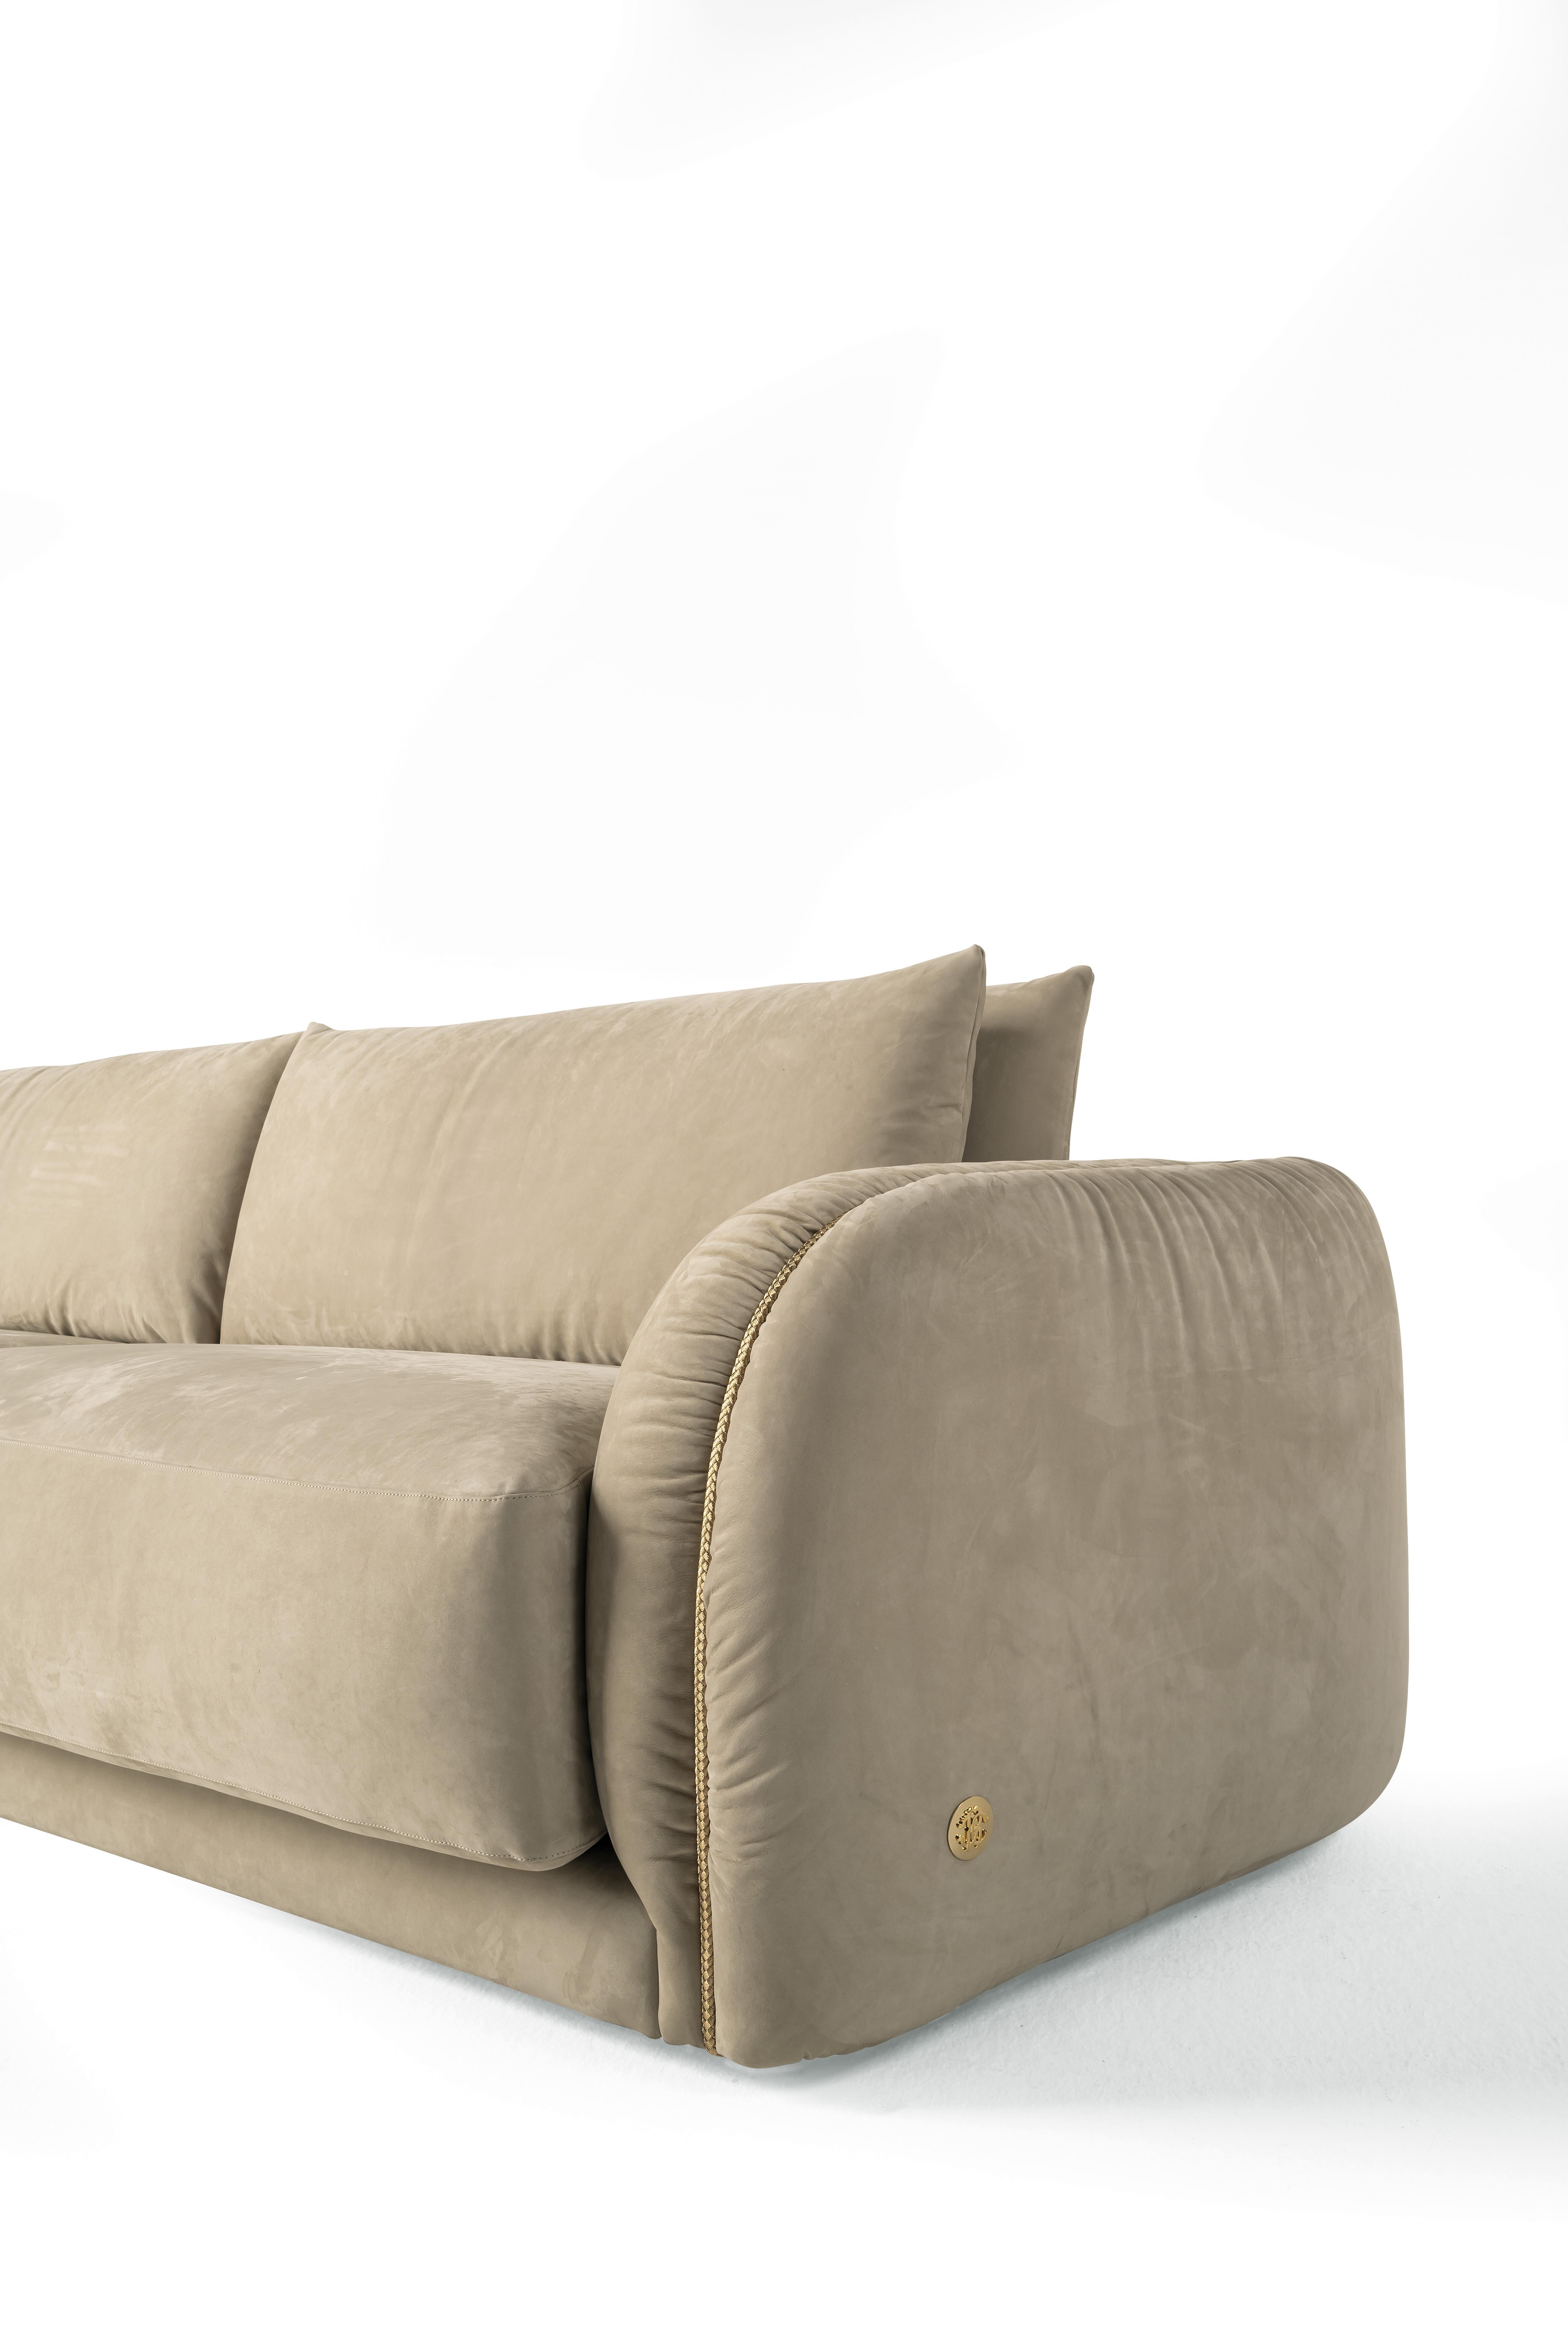 Italian 21st Century Kruger Sofa in Leather by Roberto Cavalli Home Interiors For Sale